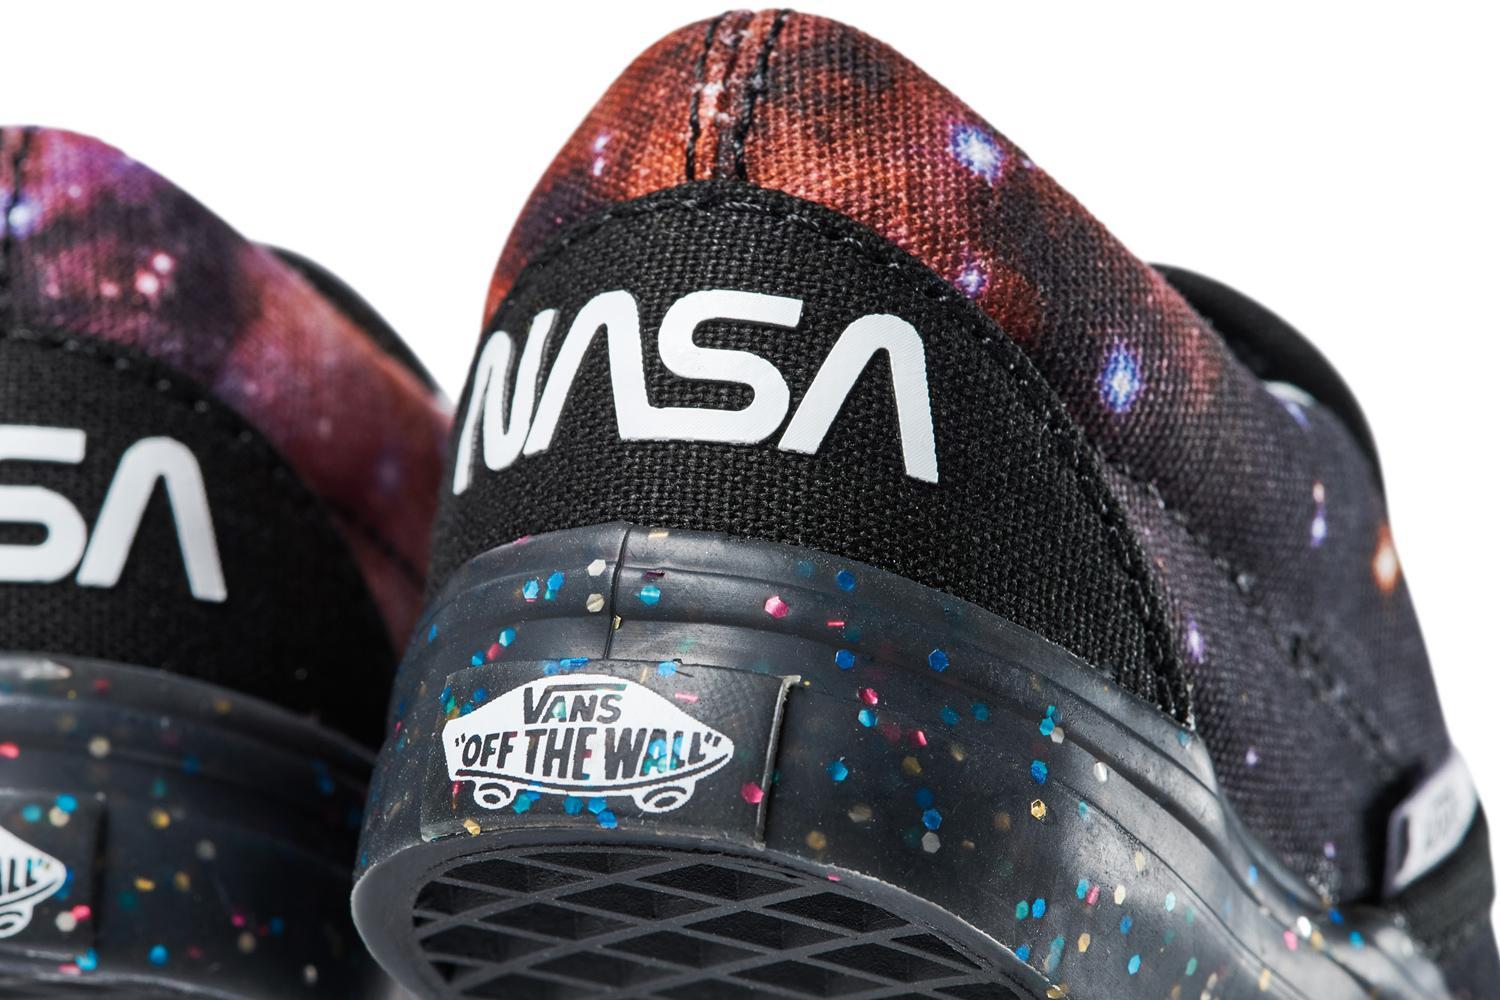 Vans Shoe Co Logo - Vans and Nasa have teamed up to create a capsule collection